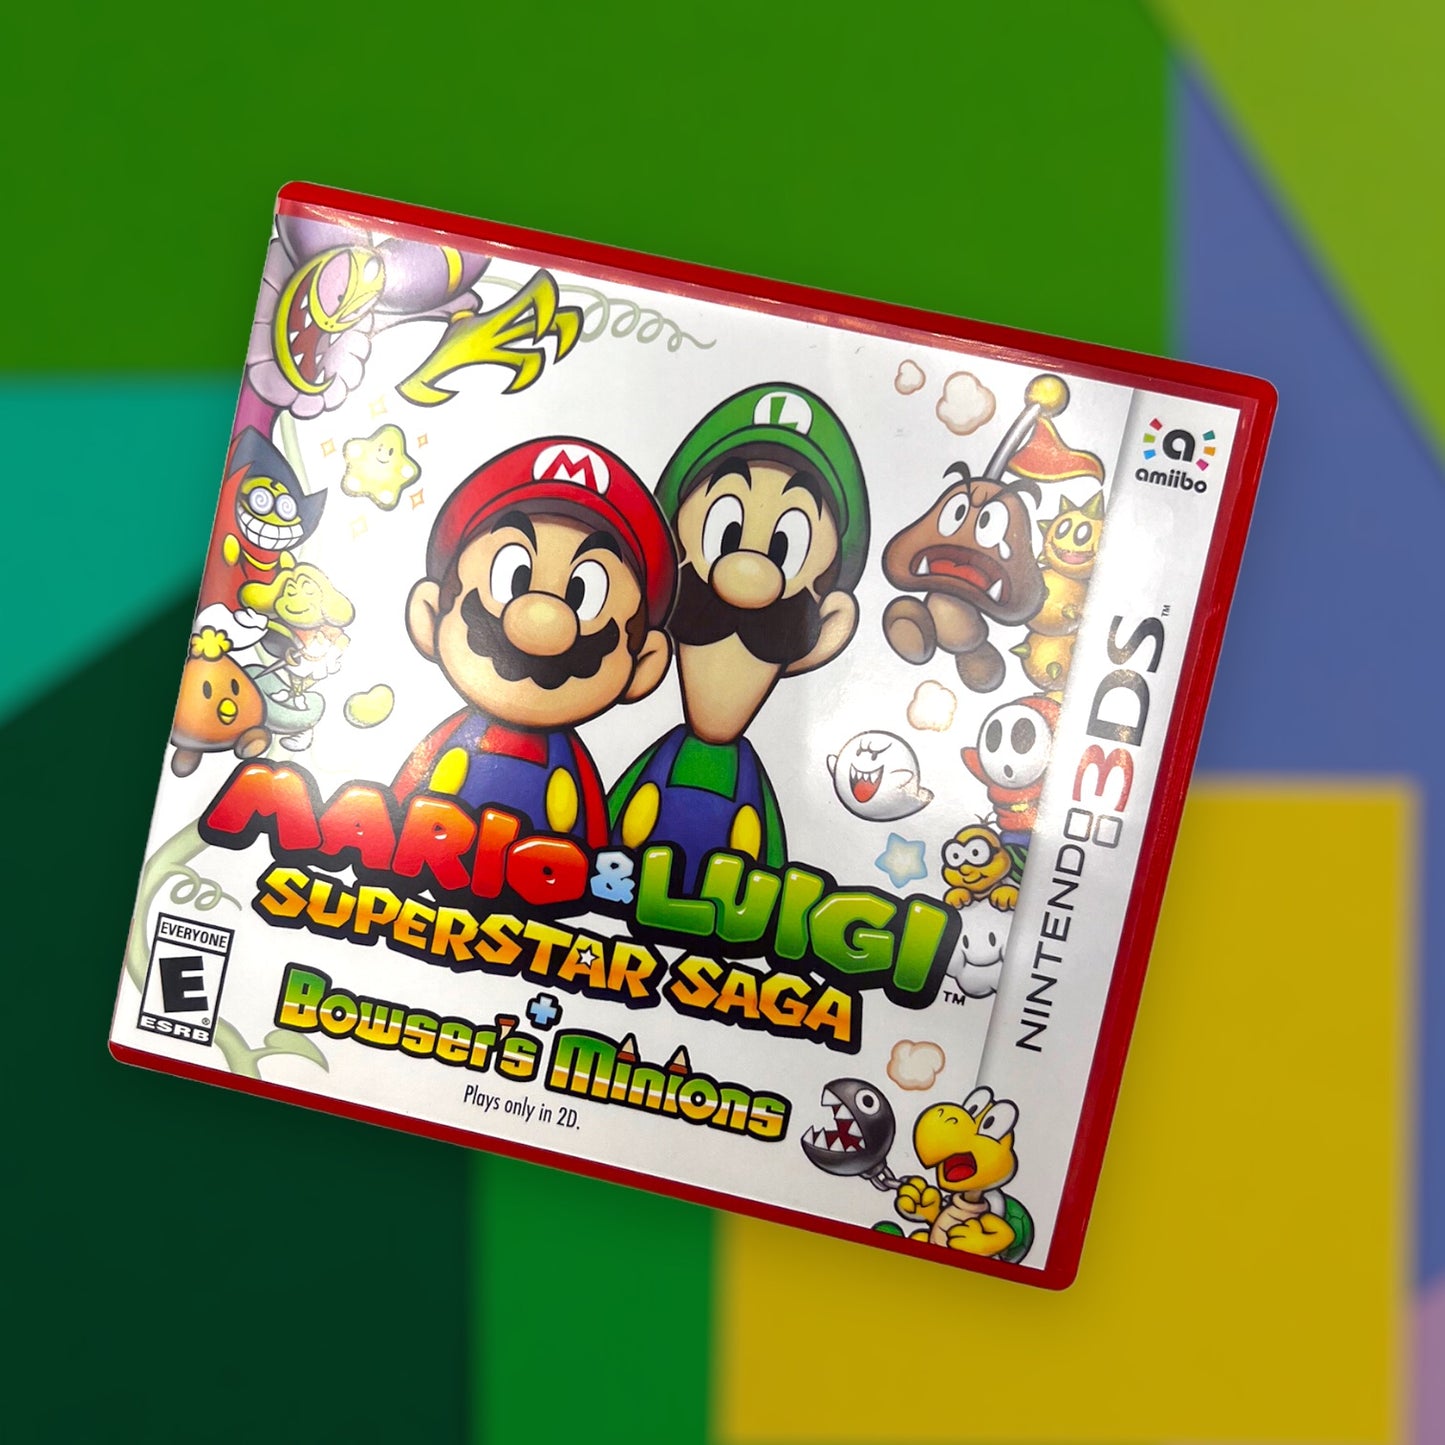 Mario & Luigi: Superstar Saga + Bowser's Minions *Case and Inserts only* (Nintendo 3DS, 2017)